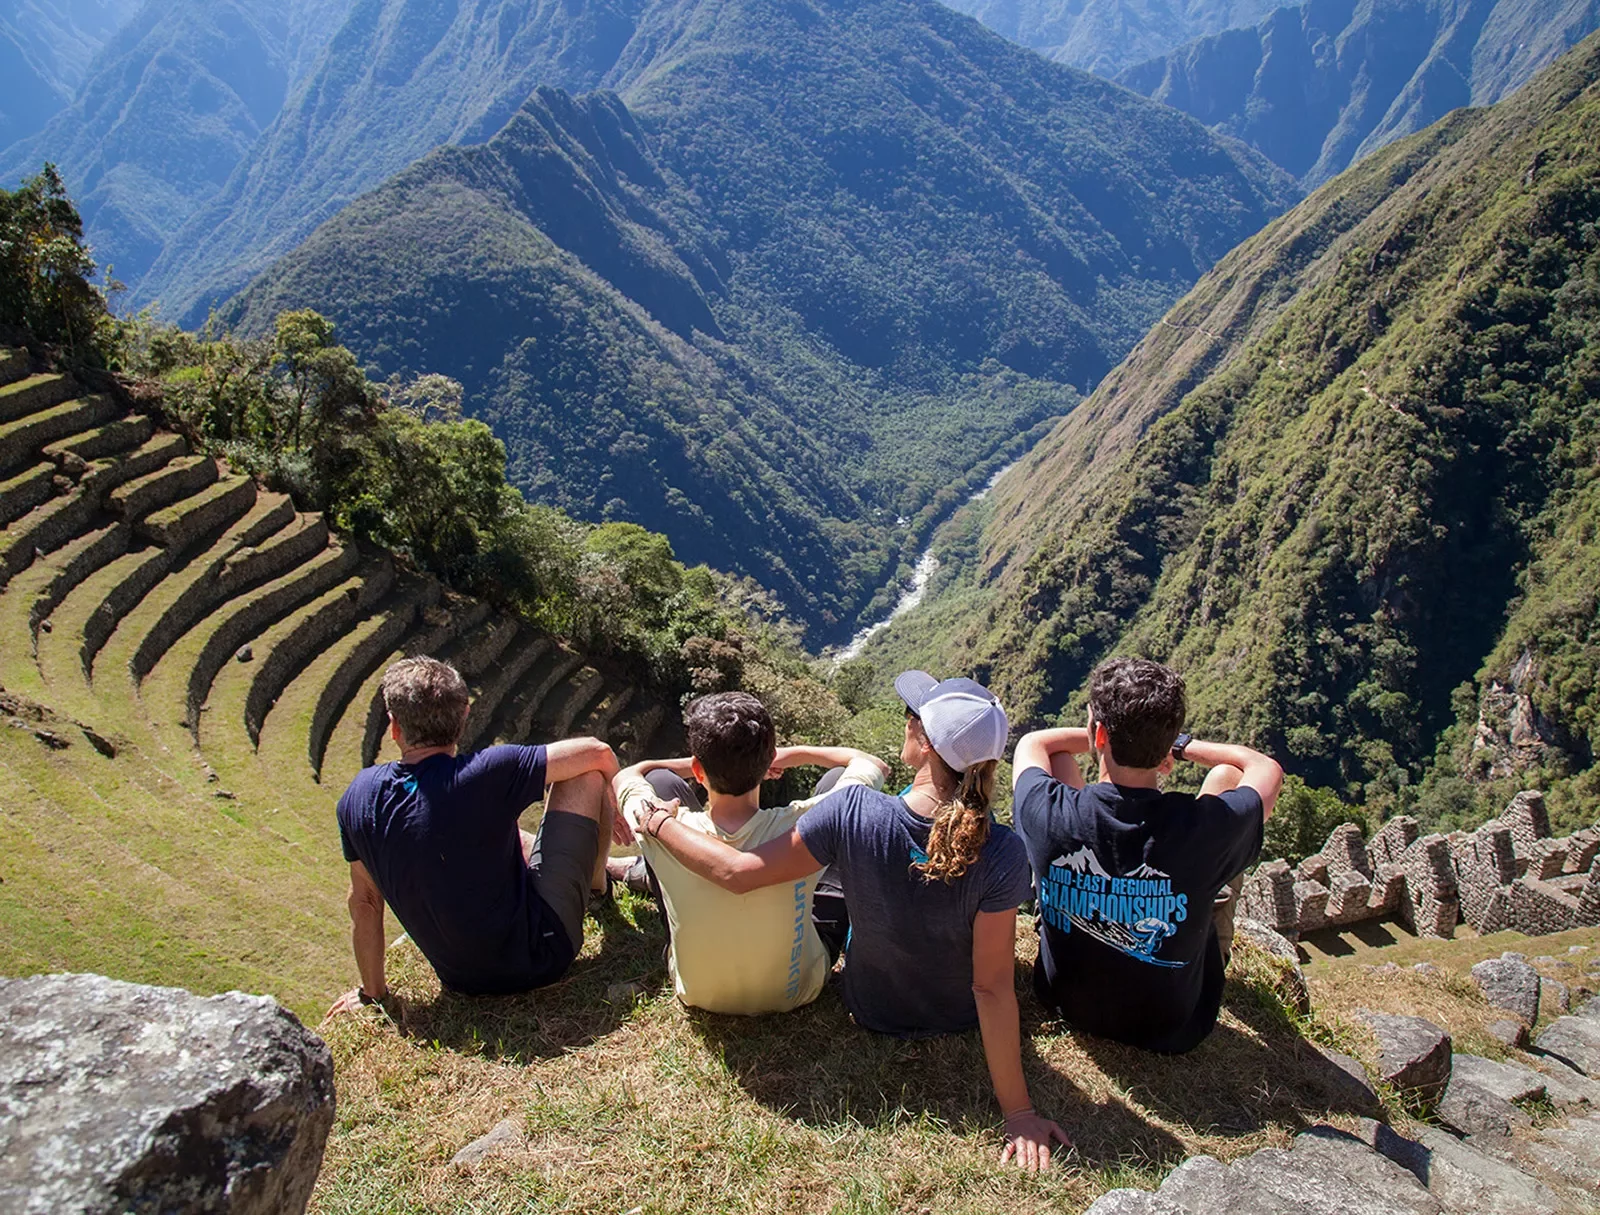 Four guests sitting on Machu Picchu hillside, overlooking mountains.